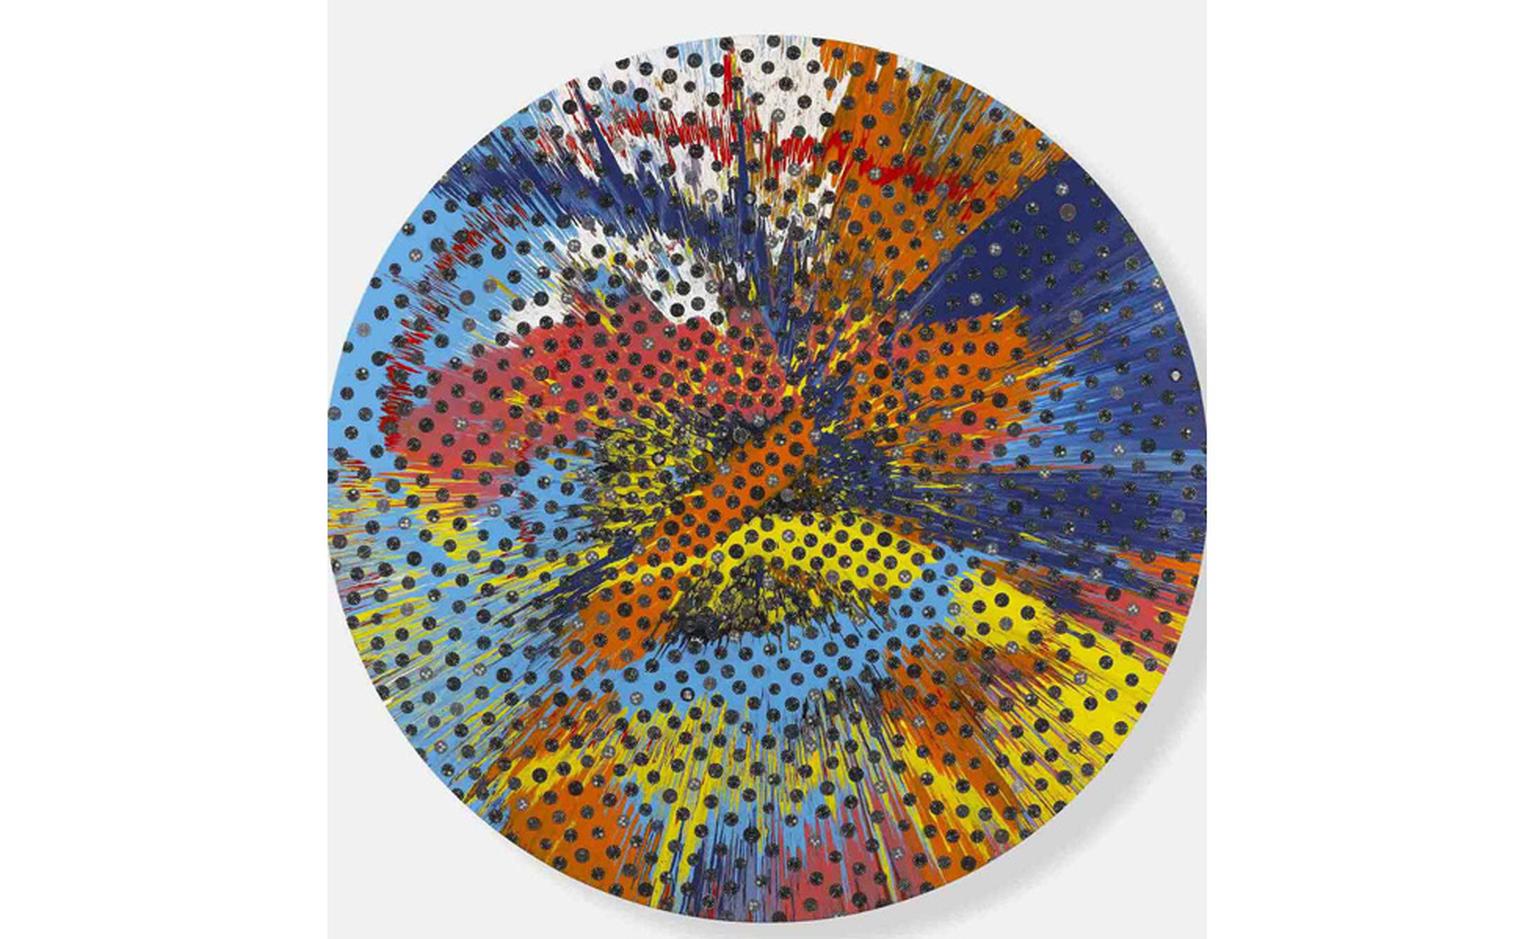 Beautiful Sunflower spin painting by Damien Hirst featuring discarded Panerai dials.